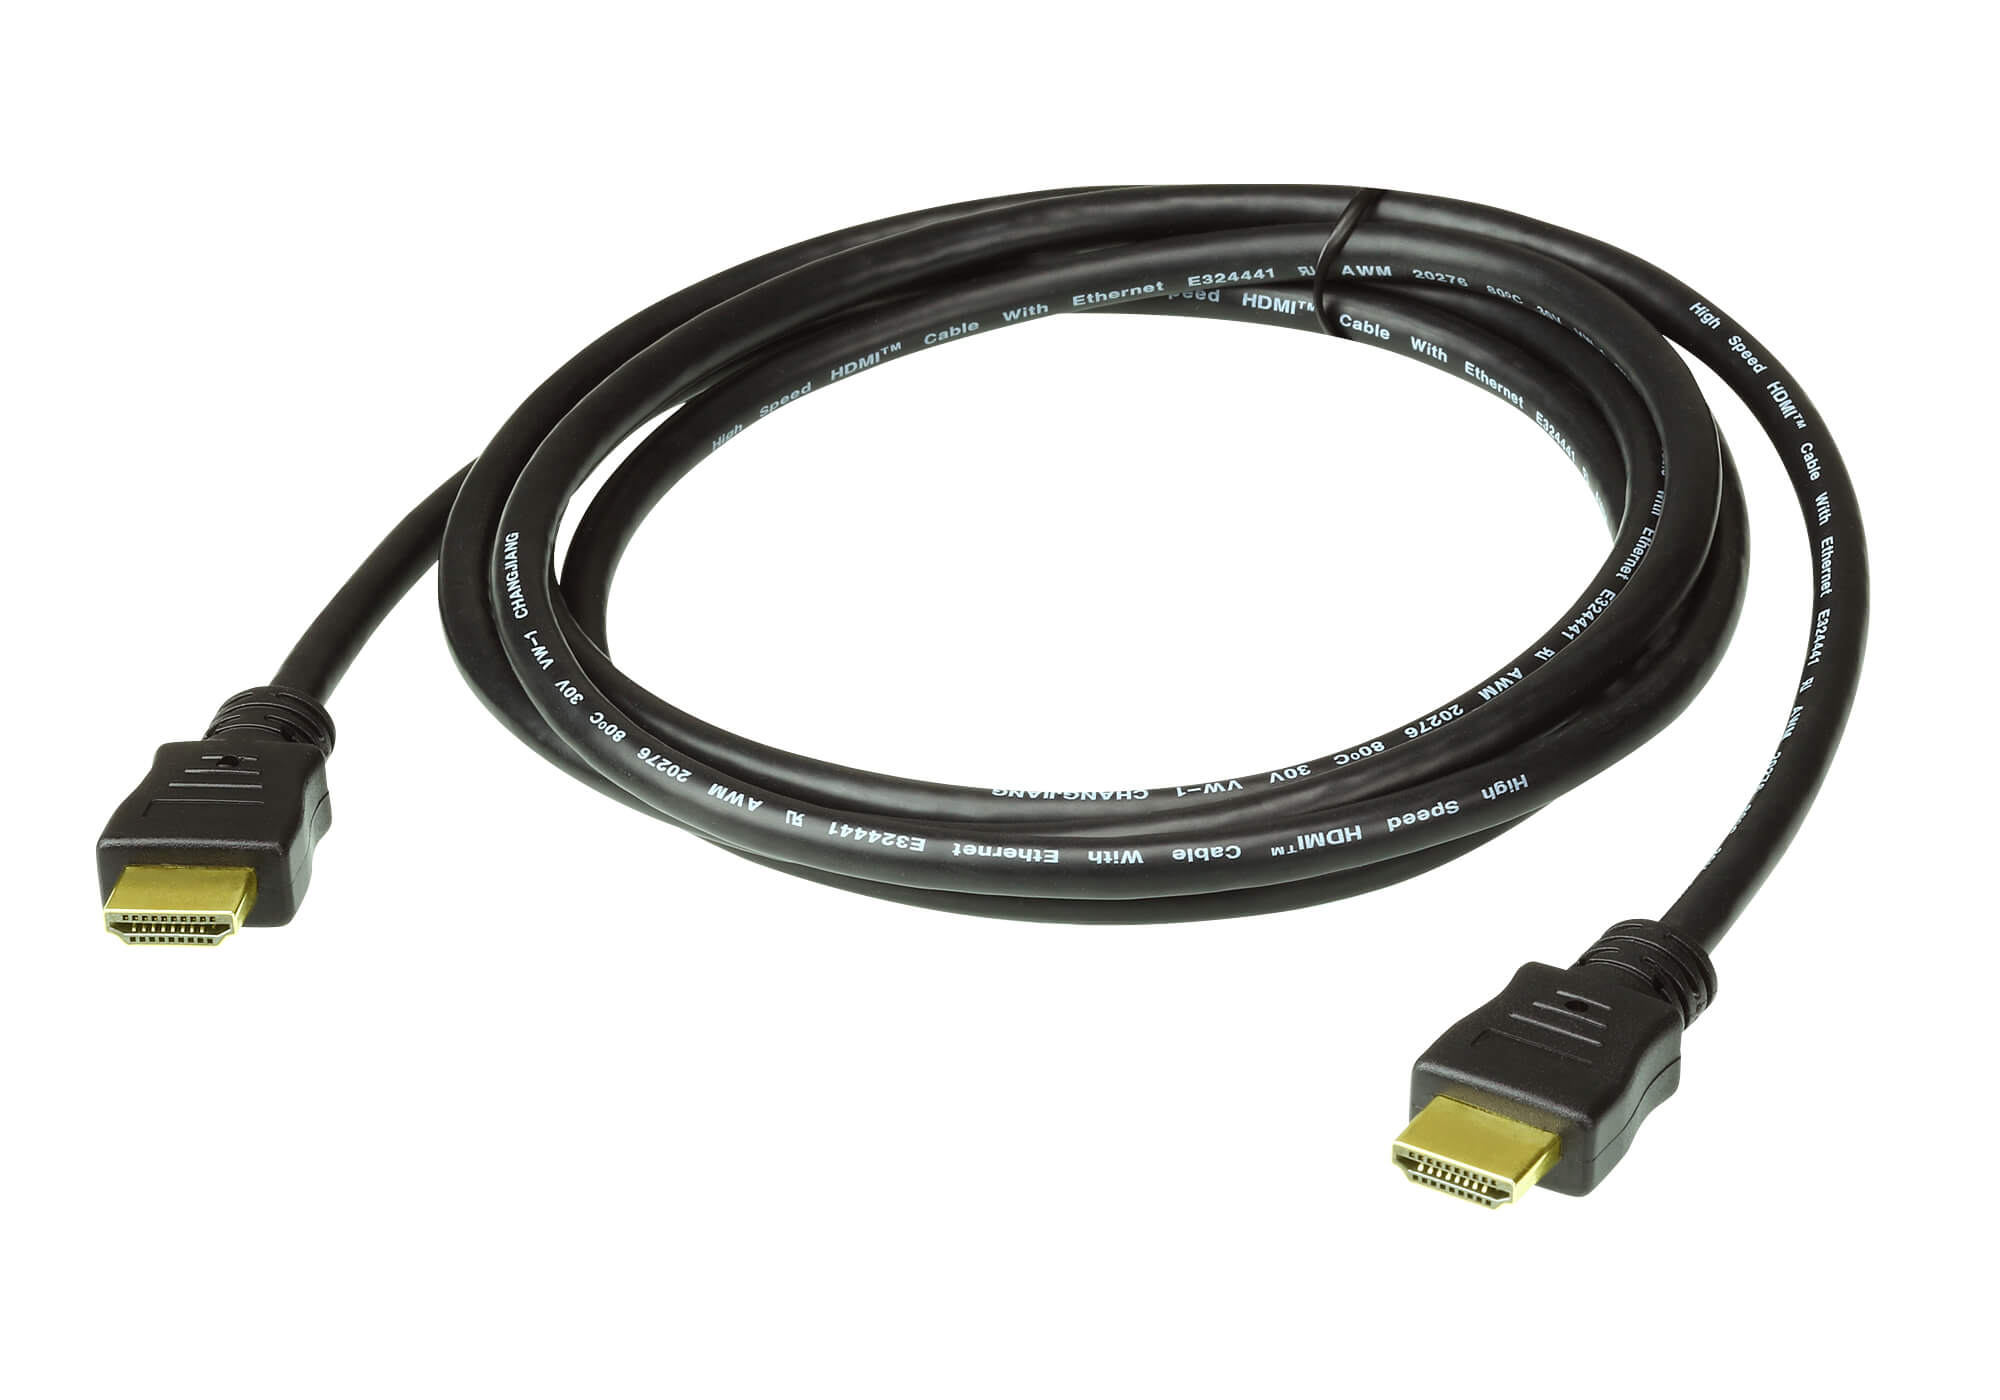 Aten 15m High Speed HDMI Cable with Ethernet, supports up to 4096 x 2160 @ 30Hz, High quality tinned copper wire with Gold-plated connectors